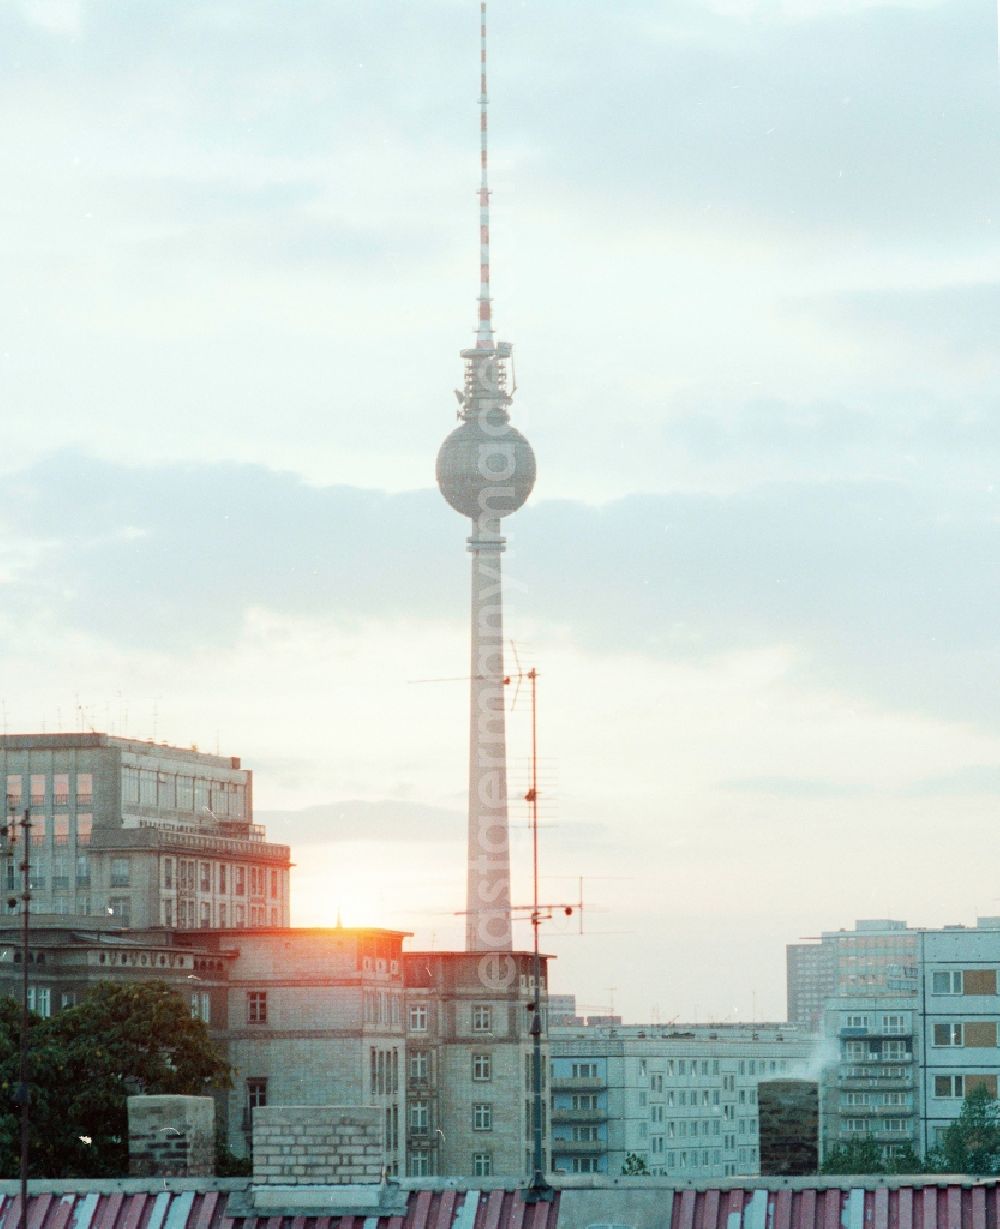 GDR photo archive: Berlin - Sunset with the TV Tower in Berlin, the former capital of the GDR, German Democratic Republic